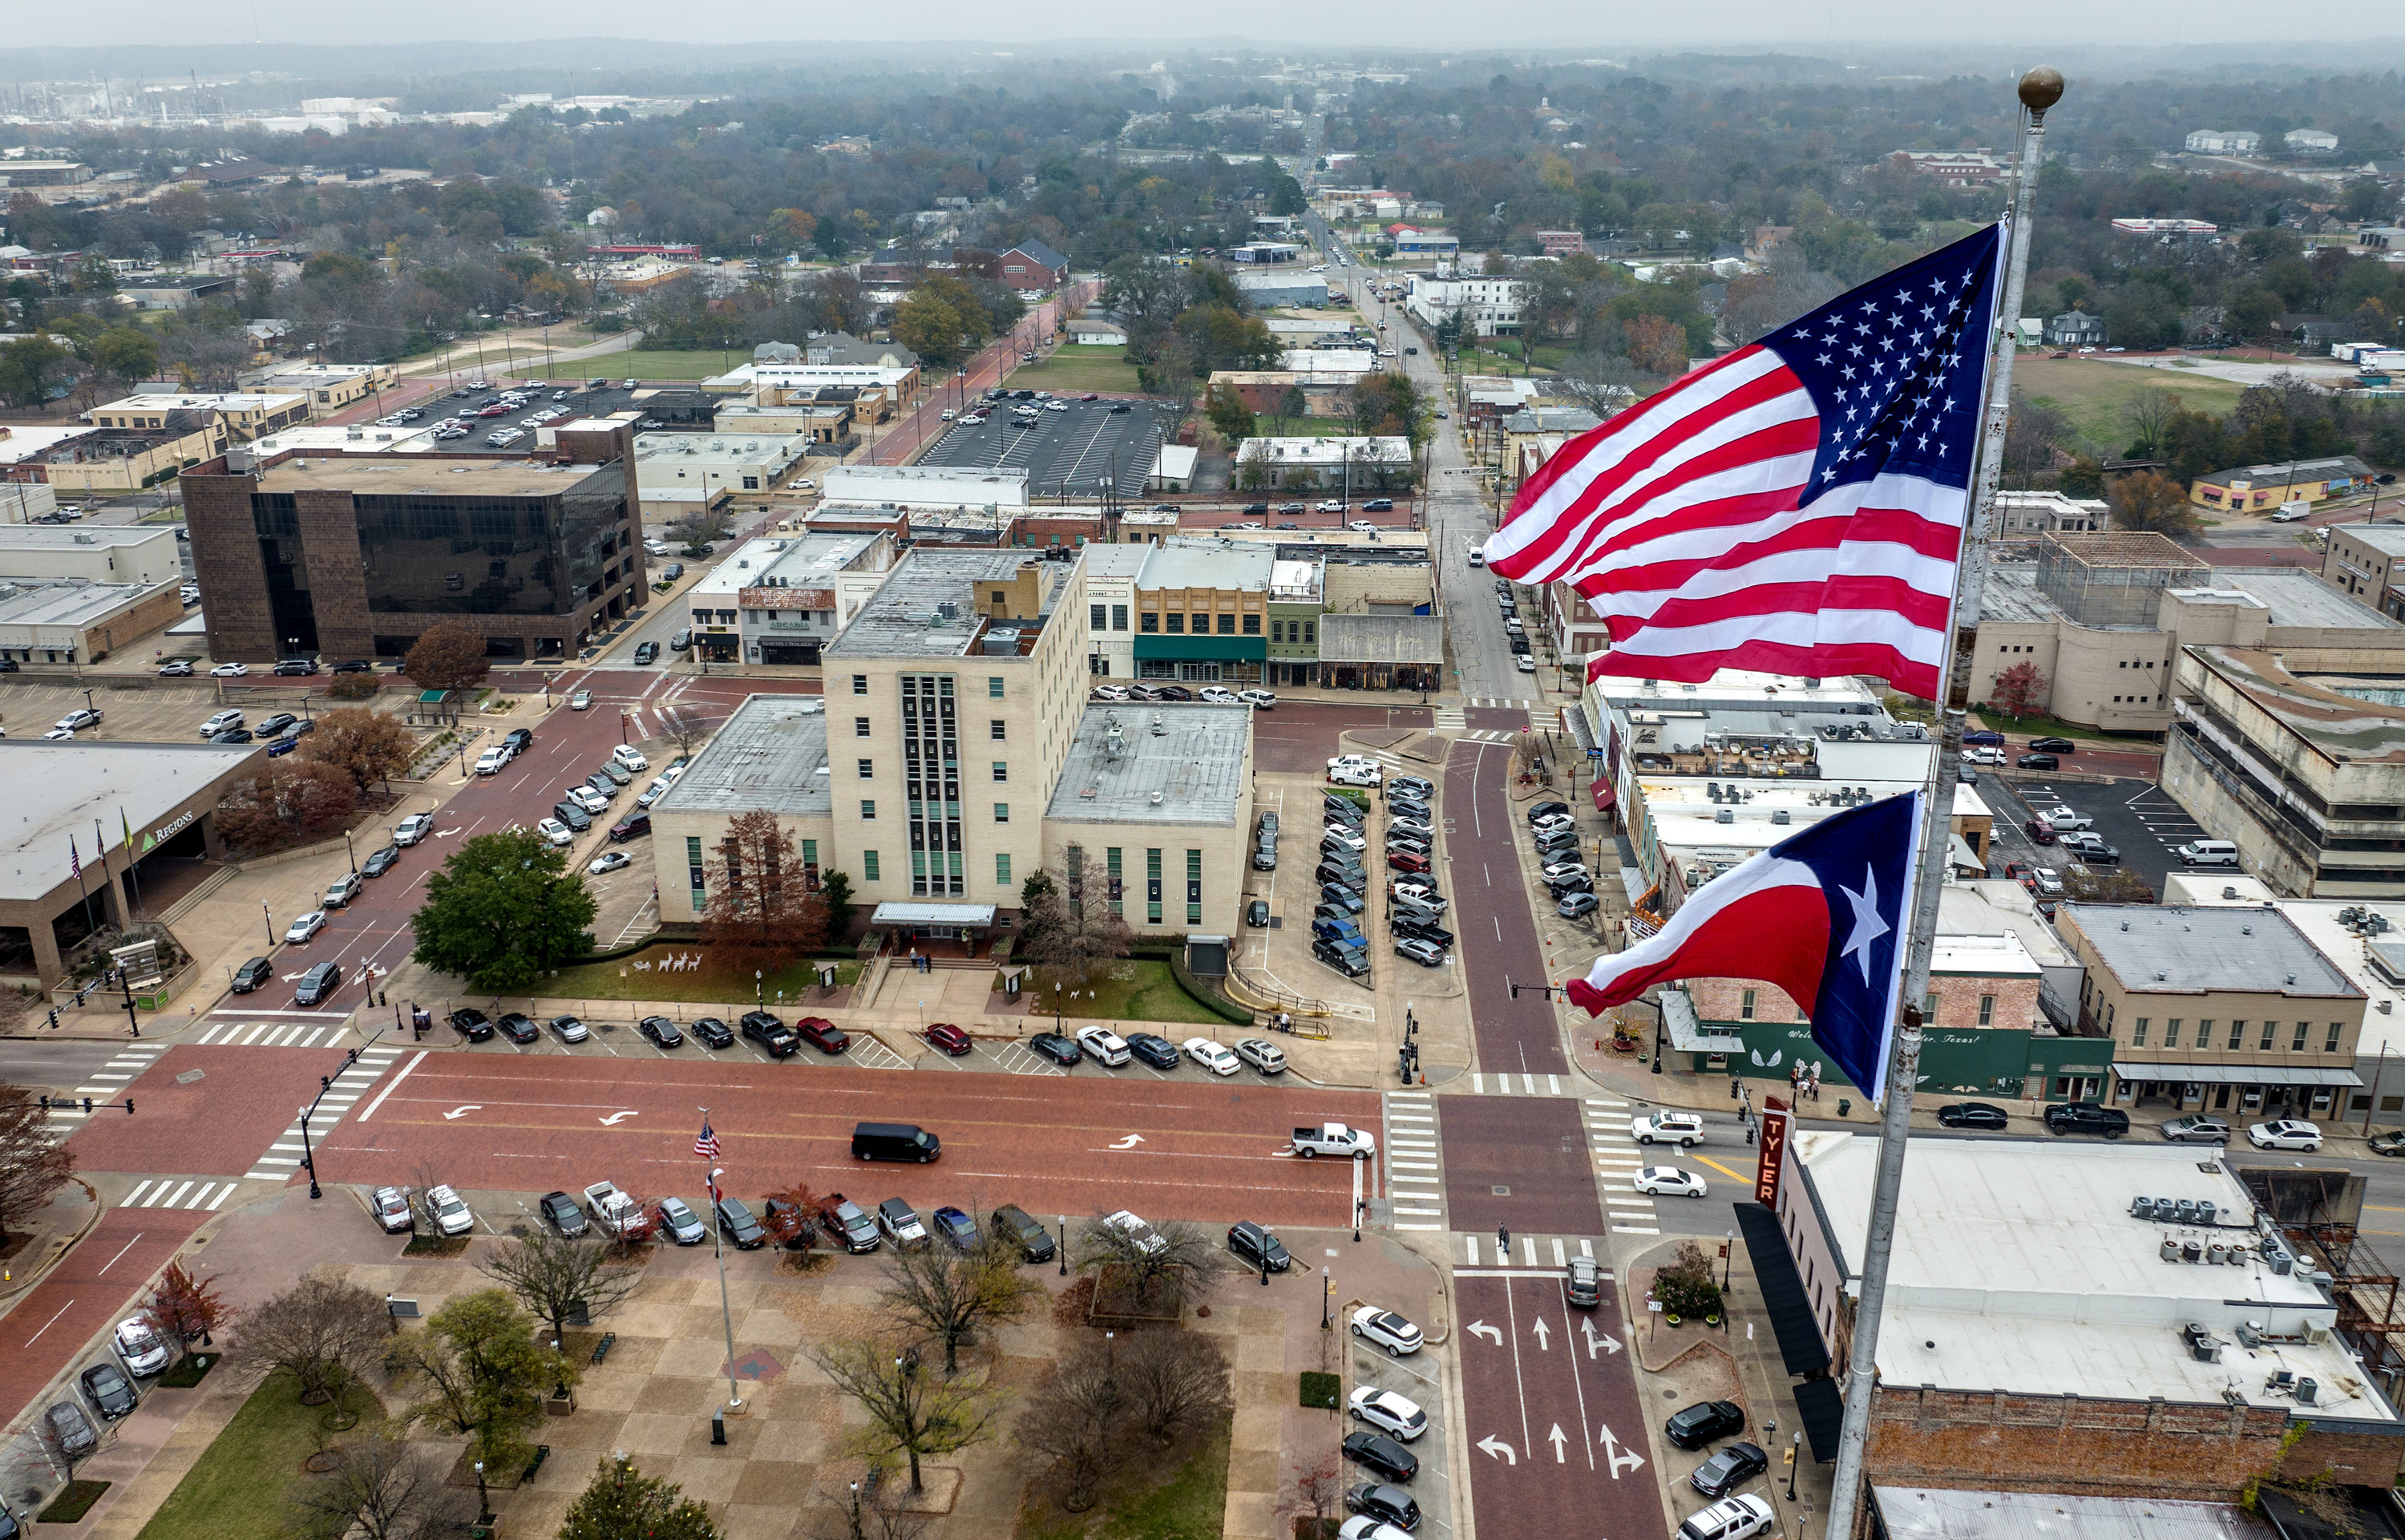 The United States and Texas flags fly in front of the Smith County courthouse in Tyler, Texas on December 9, 2022.